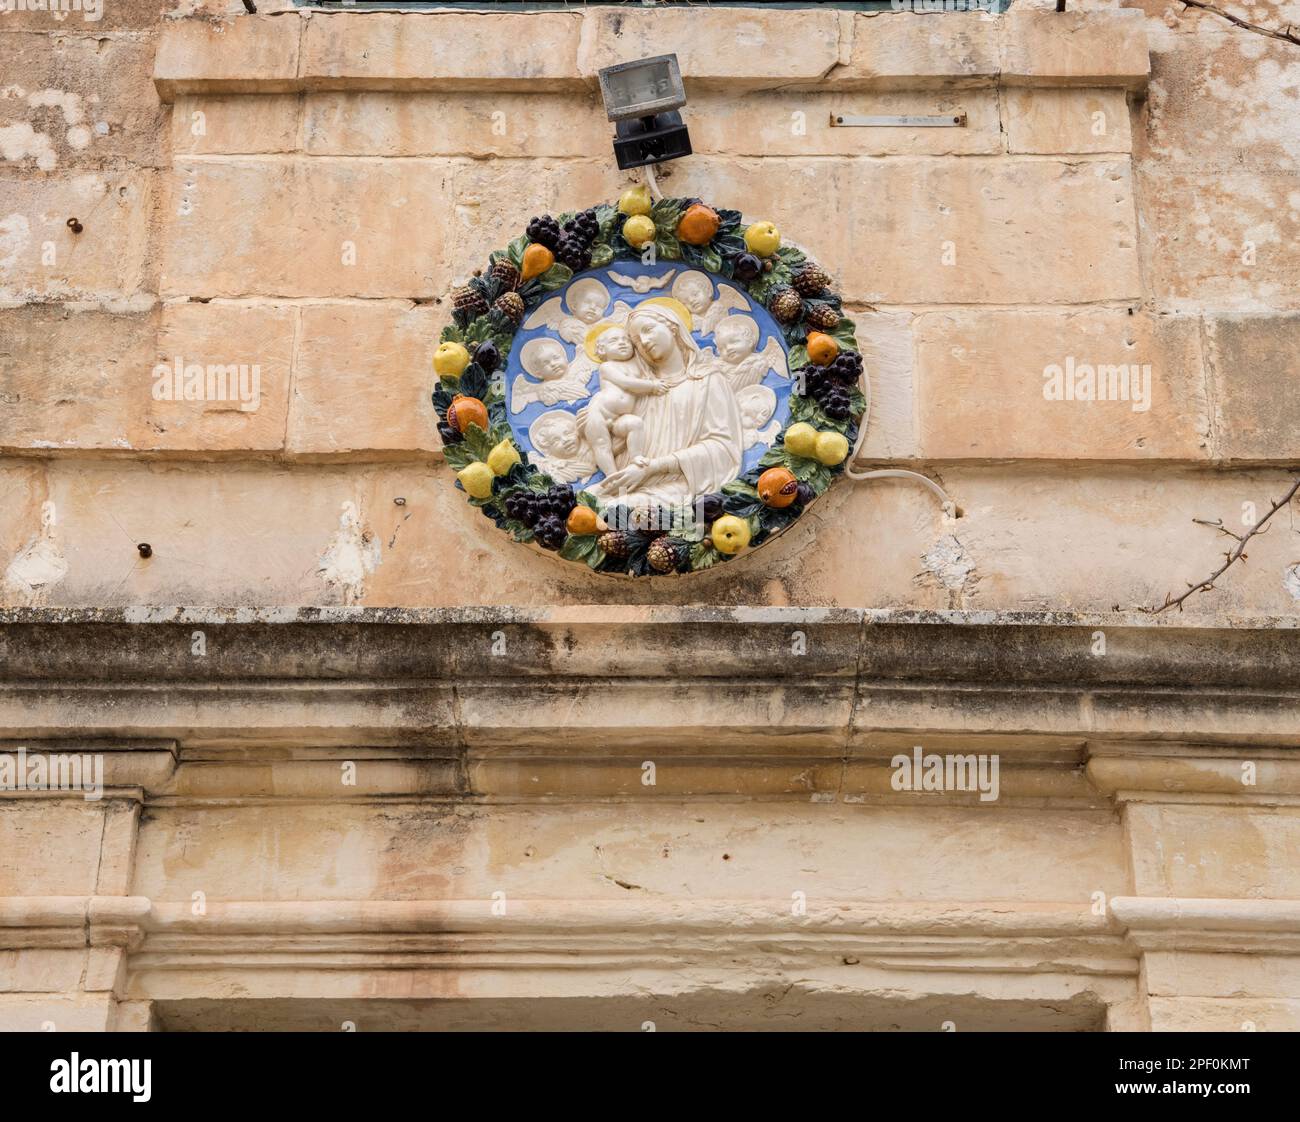 one of the many decorations in the old walled city of mdina the old capital in central malta Stock Photo